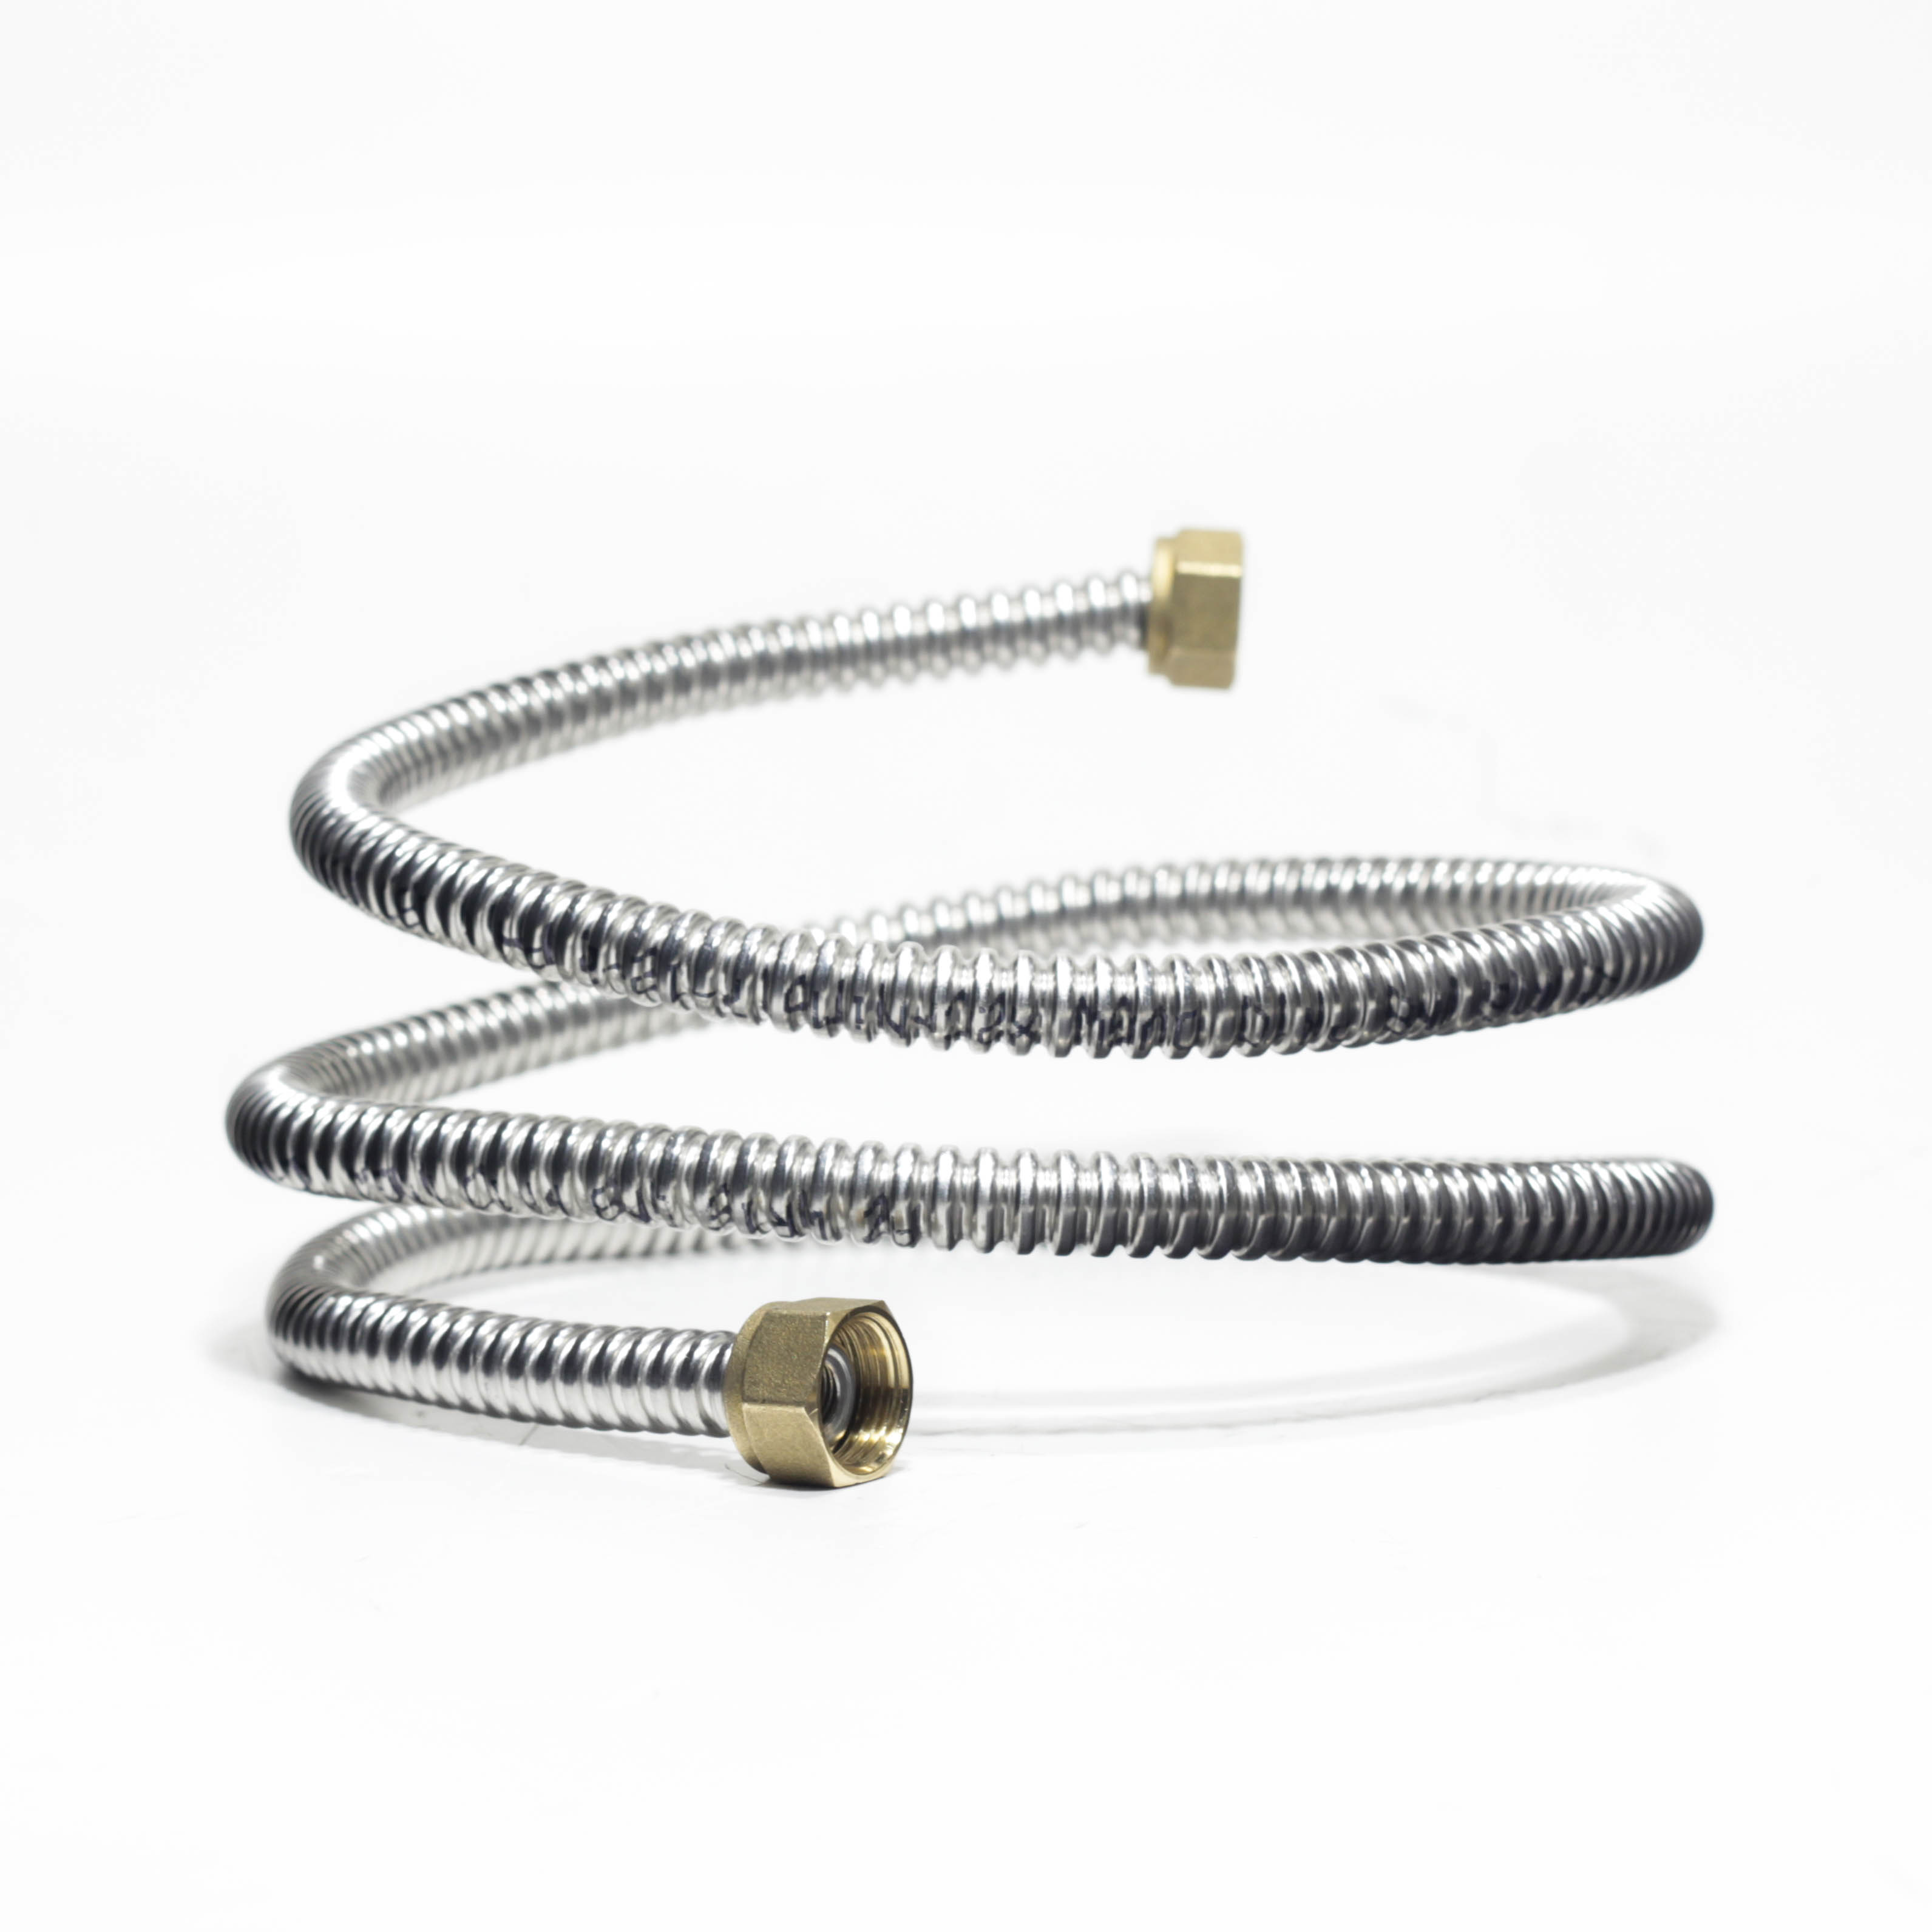 Air Hoses "Stainless Steel"